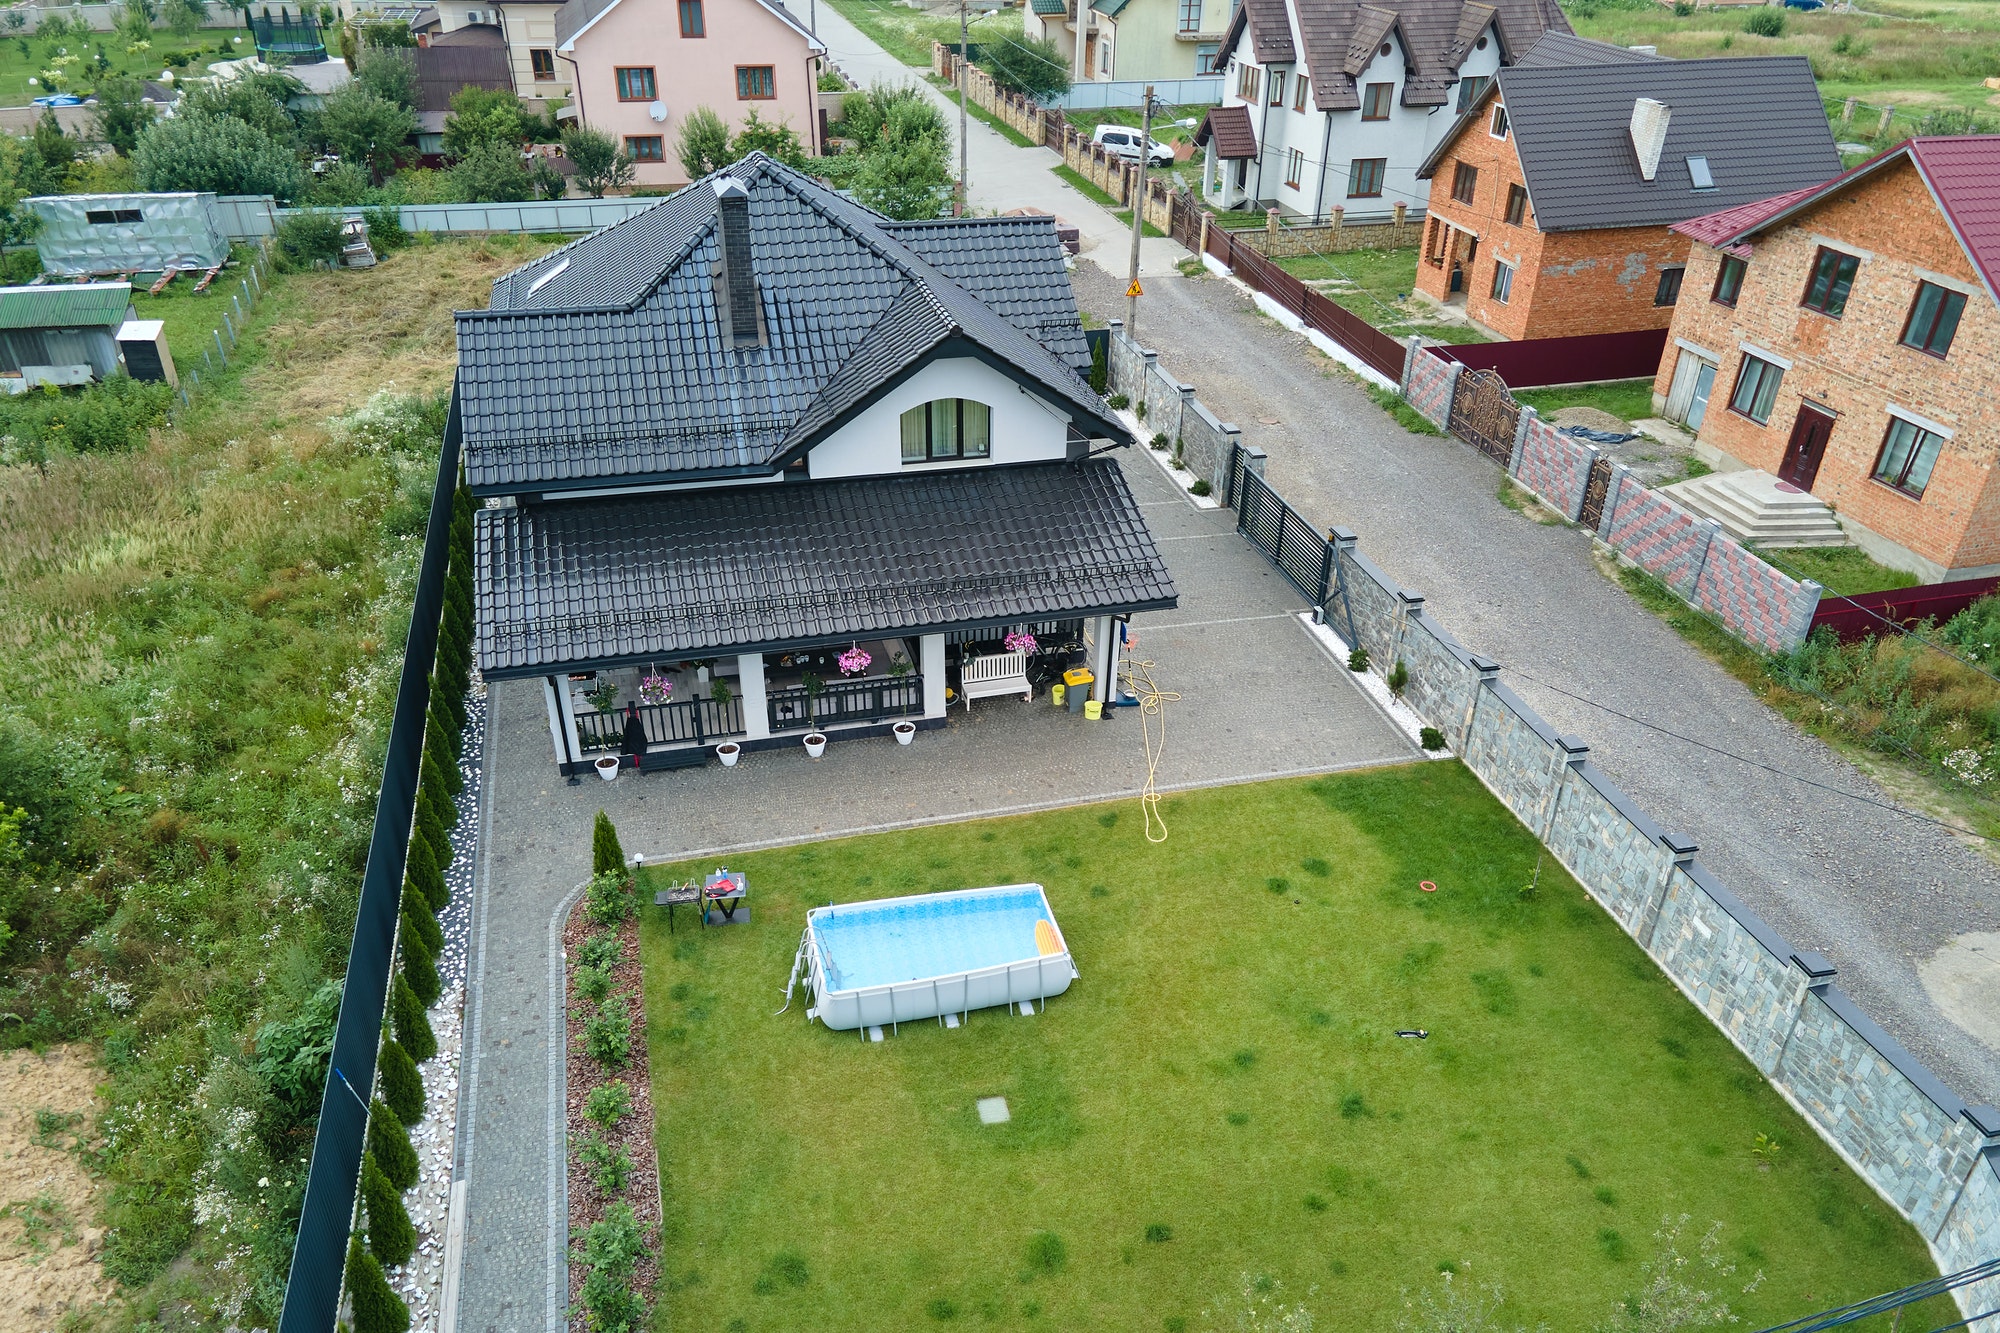 Aerial view of private house with green backyard and small swimming pool on grass lawn